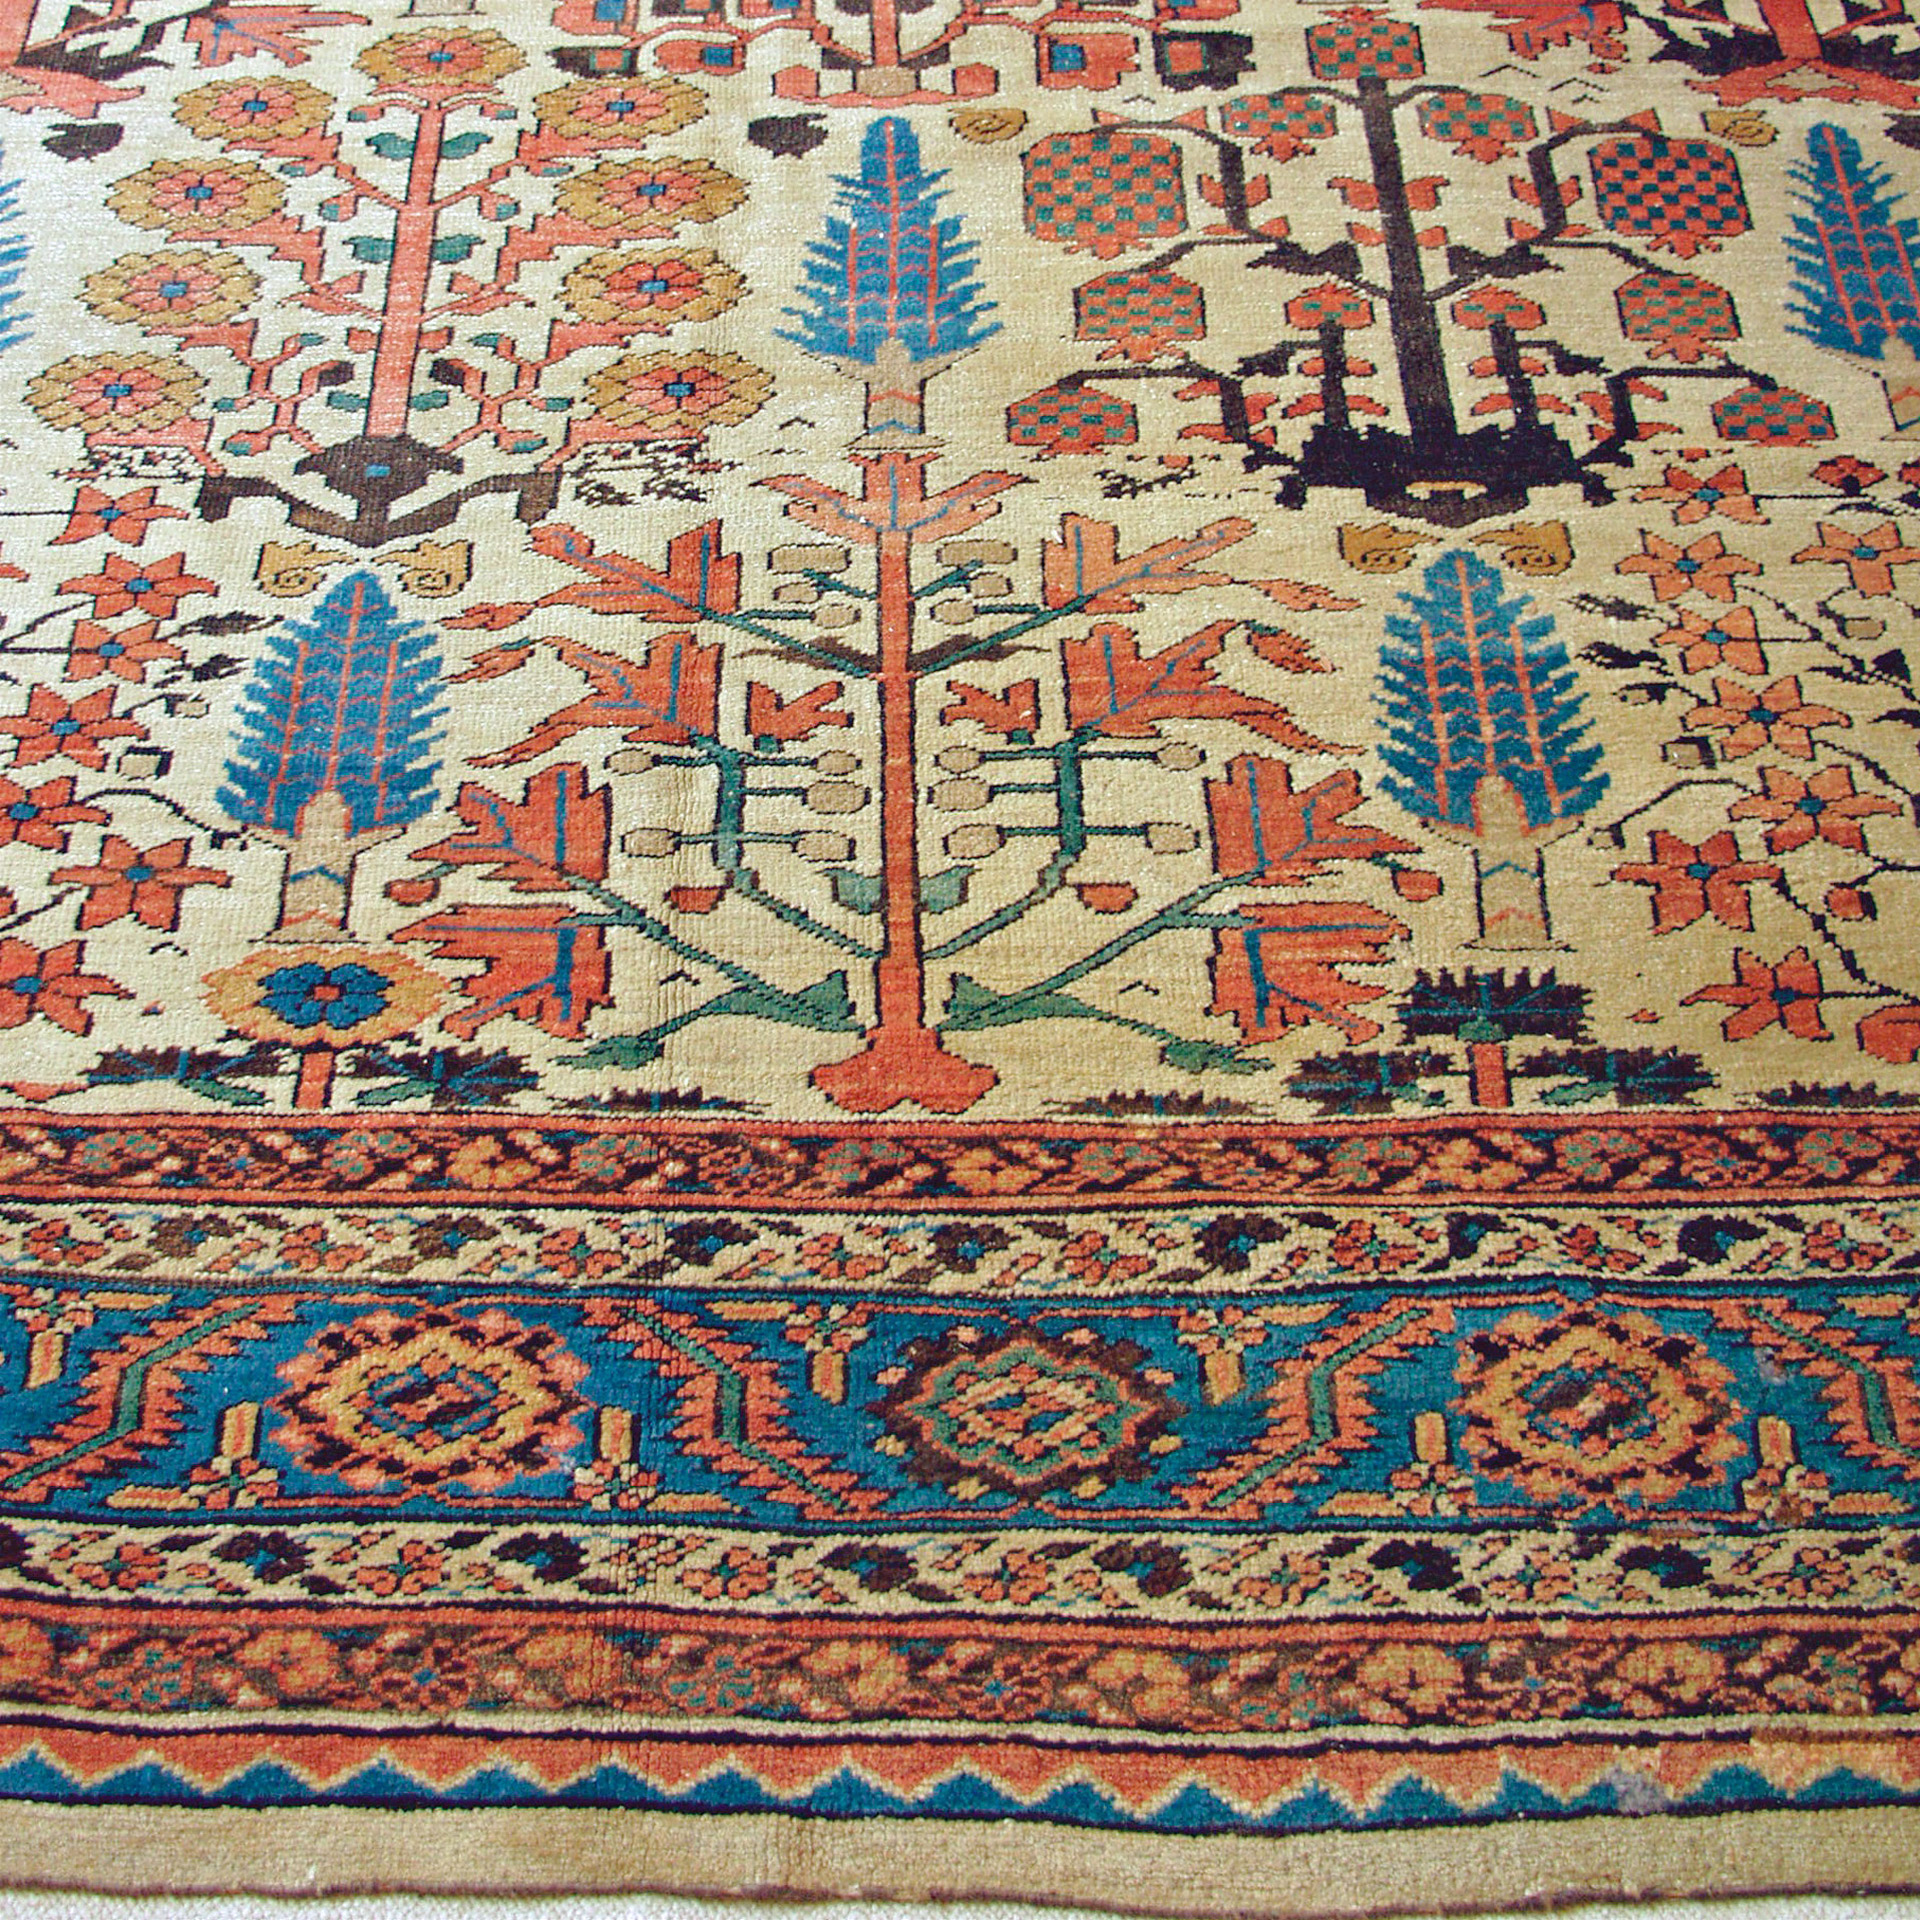 Border and field detail from a 19th century northwest Persian Bakshaish carpet with a Shrub design, Douglas Stock Gallery, antique Persian carpets, Boston,MA area, antique carpets New York